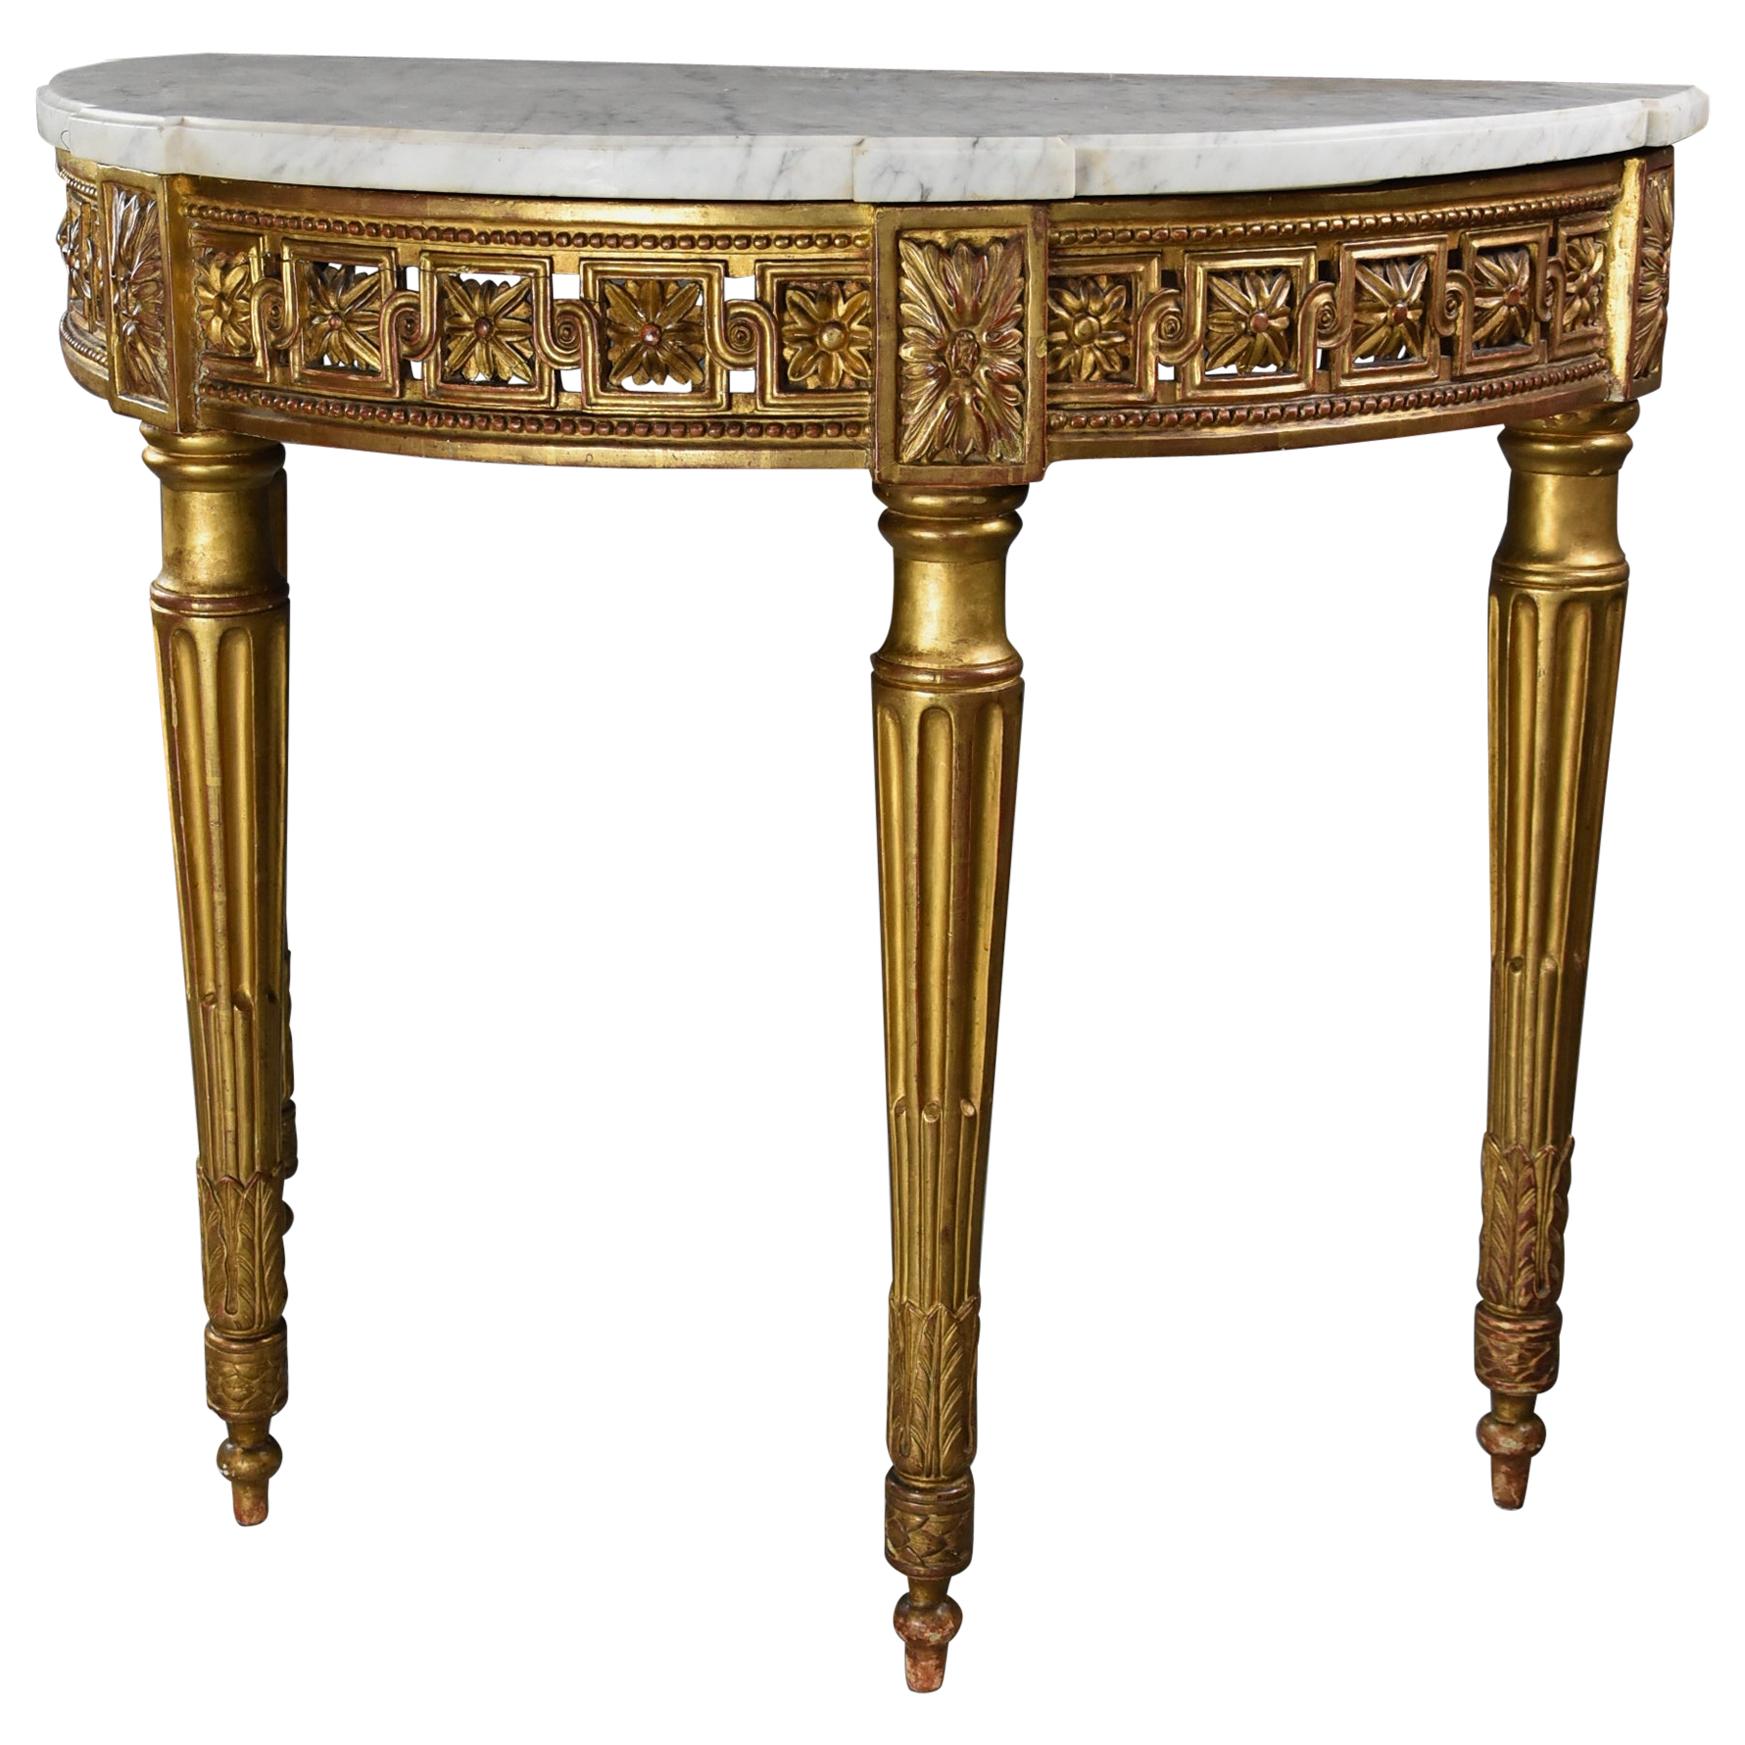 Highly Decorative 19th Century French Demilune Gilt Console Table For Sale